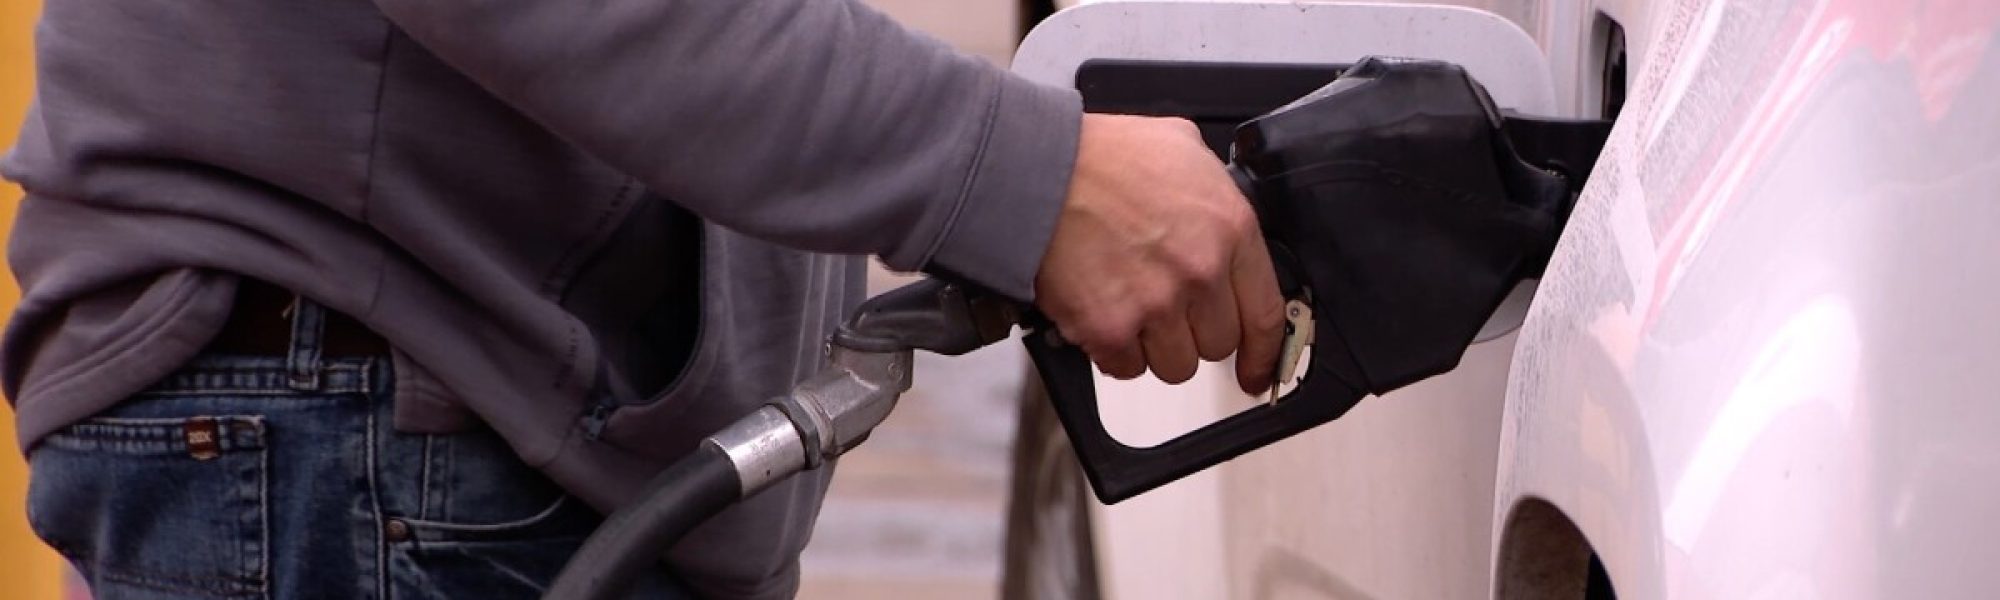 Rising gas prices in CO after refinery shutdown, impacting drivers, petroleum companies